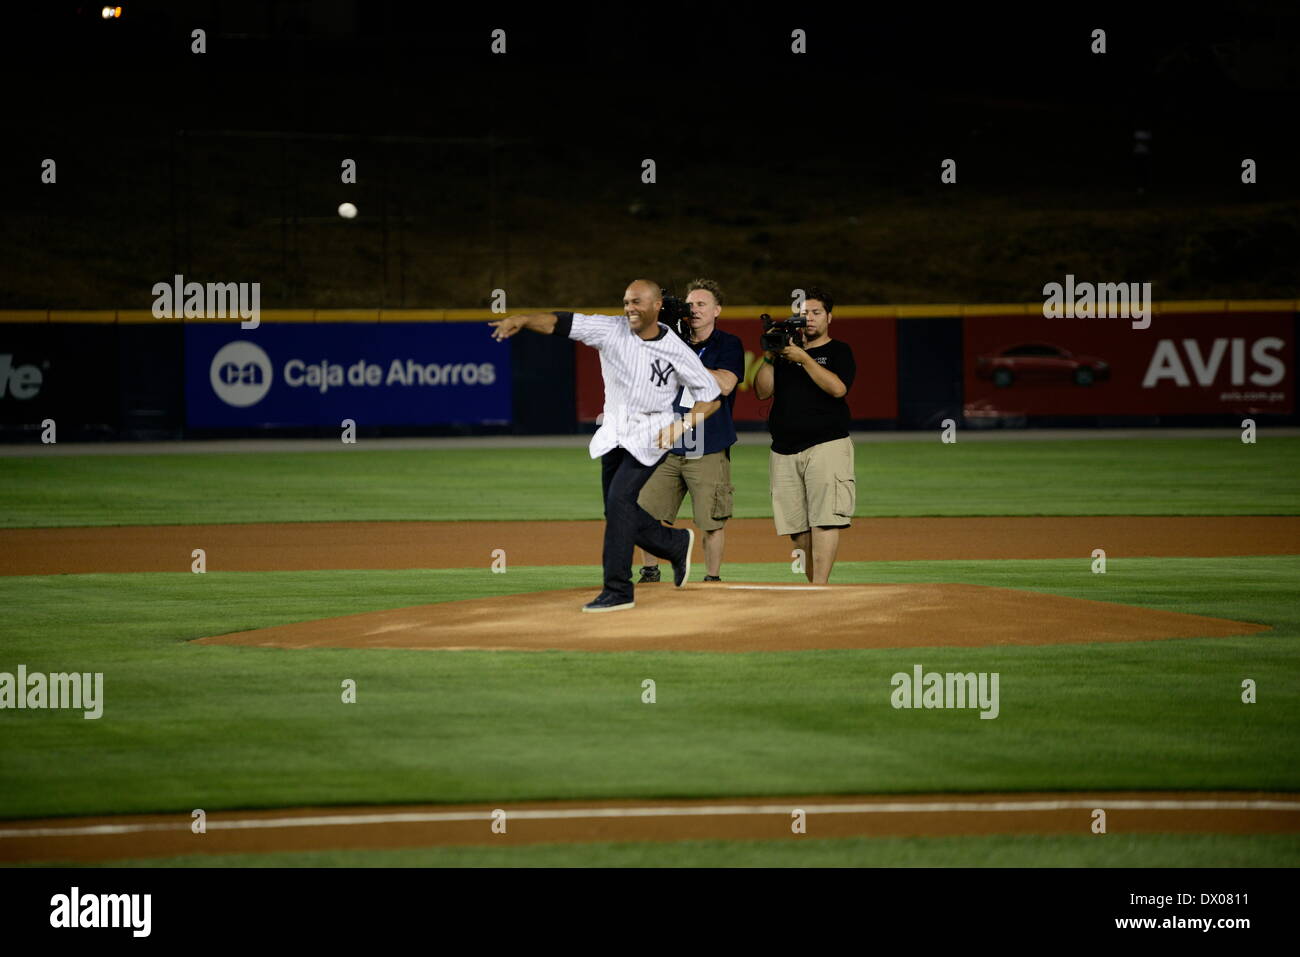 Panama City, Panama. 15th Mar, 2014. Former player of the New York Yankees, Mariano Rivera (L), throws the first pitch of the match between New York Yankees and Miami Marlins at Rod Carew Stadium, in Panama City, capital of Panama, on March 15, 2014. The New York Yankees and the Miami Marlins play exhibition games here in homage to Mariano Rivera. Credit:  Mauricio Valenzuela/Xinhua/Alamy Live News Stock Photo